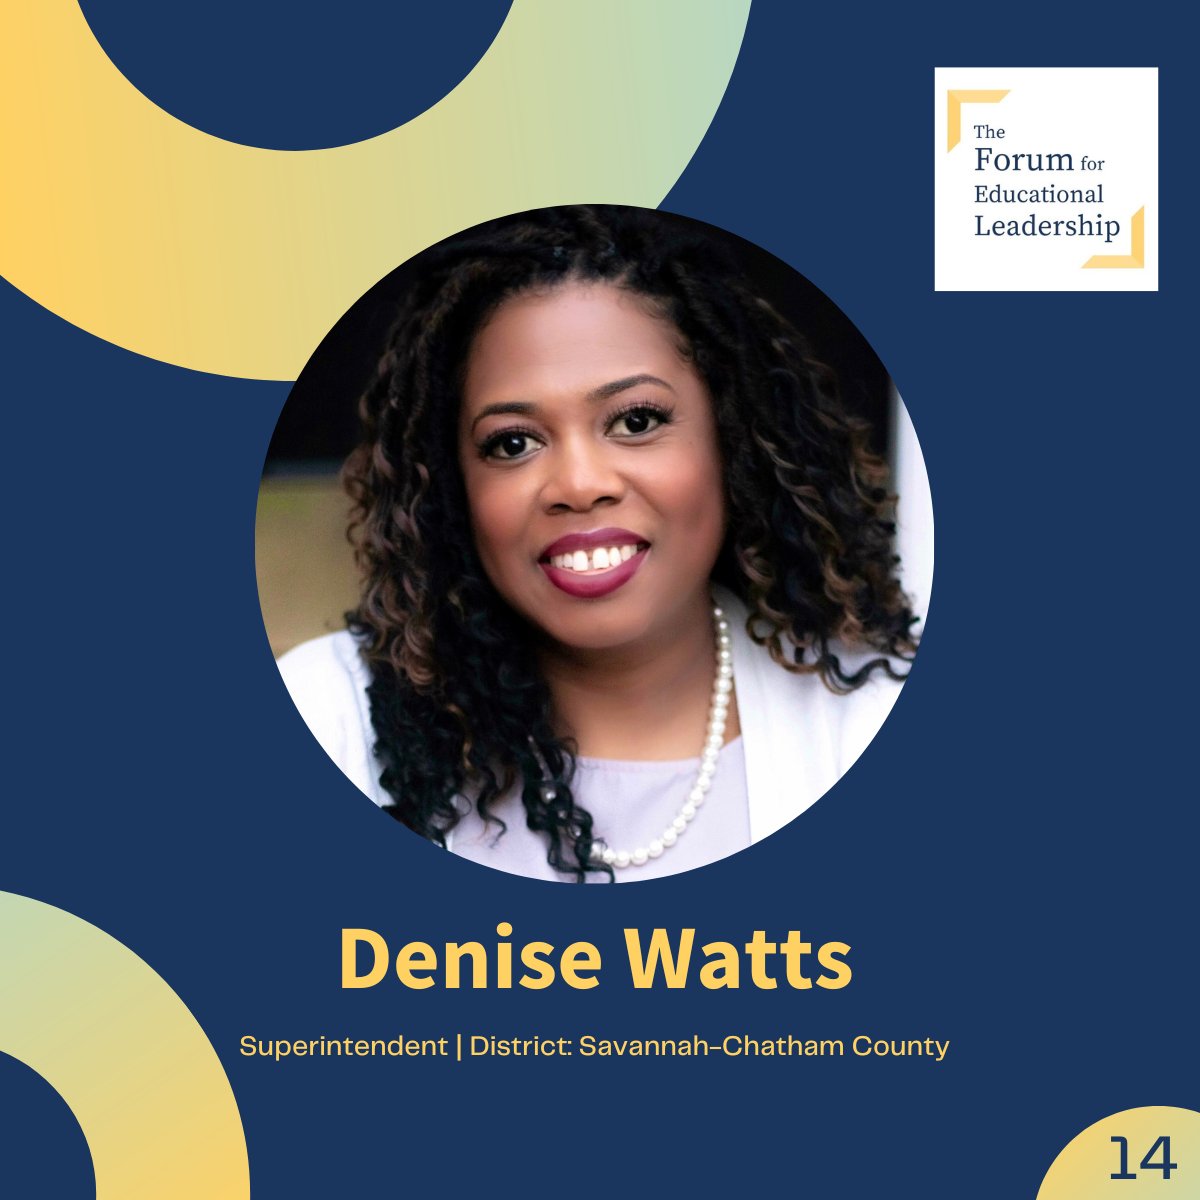 Next, we are honored to celebrate @denisewatts75, newly appointed Superintendent of @SCCPSS! We are so excited to watch you shine in this role, and can't wait to see the strides you make in the district and community! #TBT #WomenLeadingEd